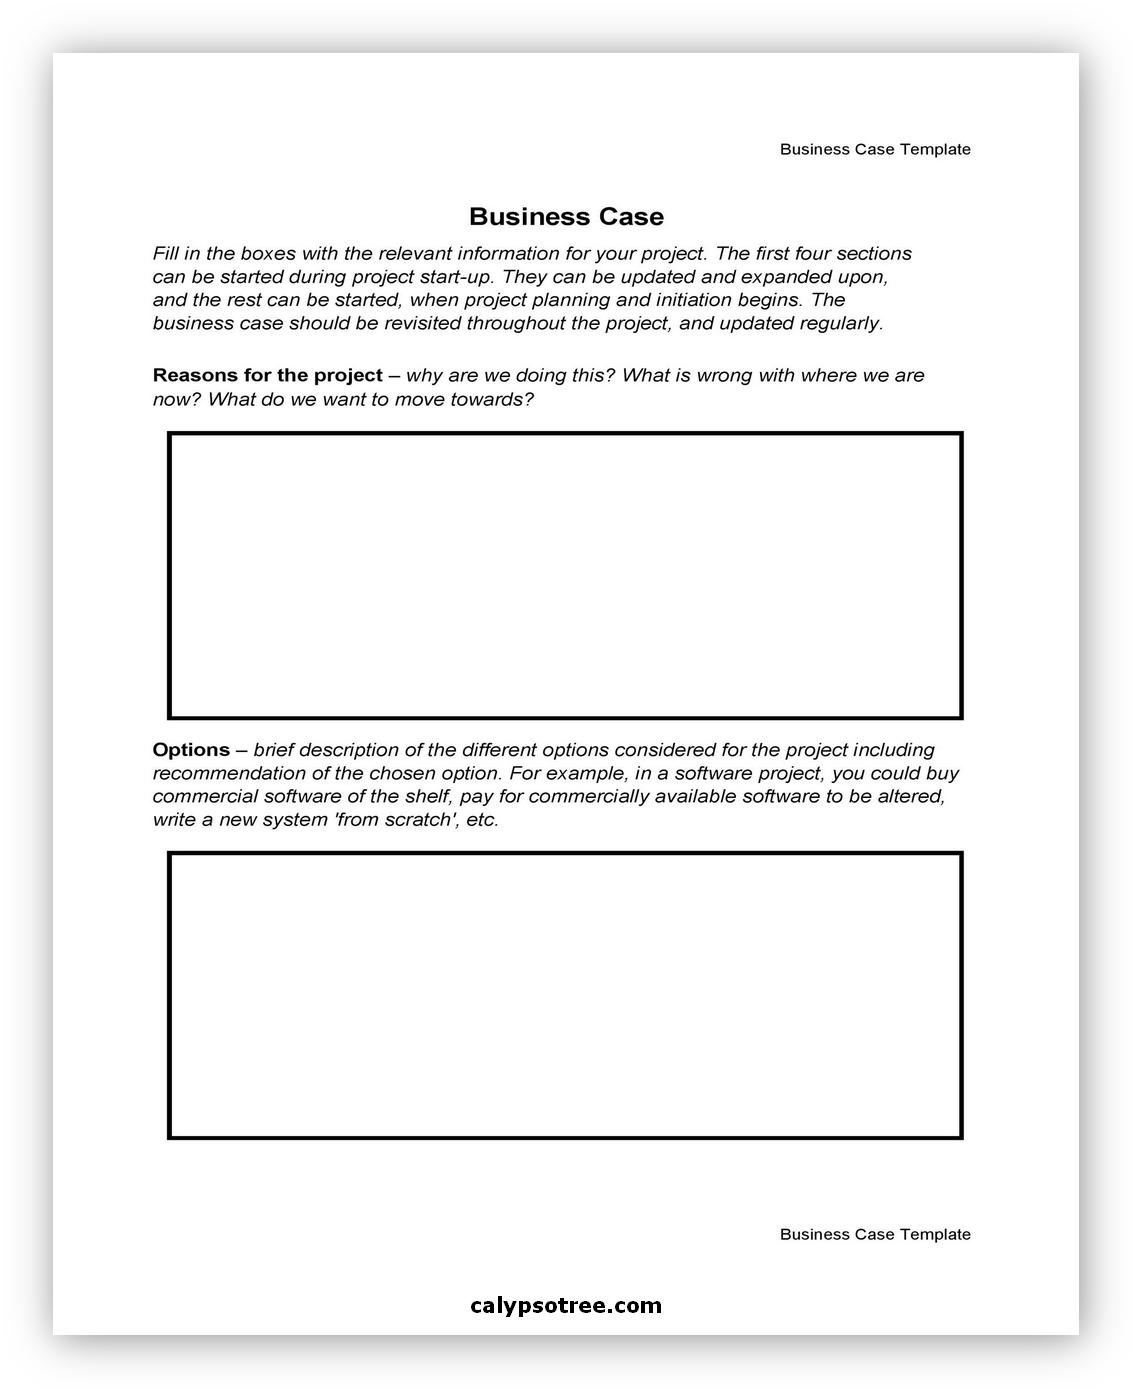 Business Case Example 02